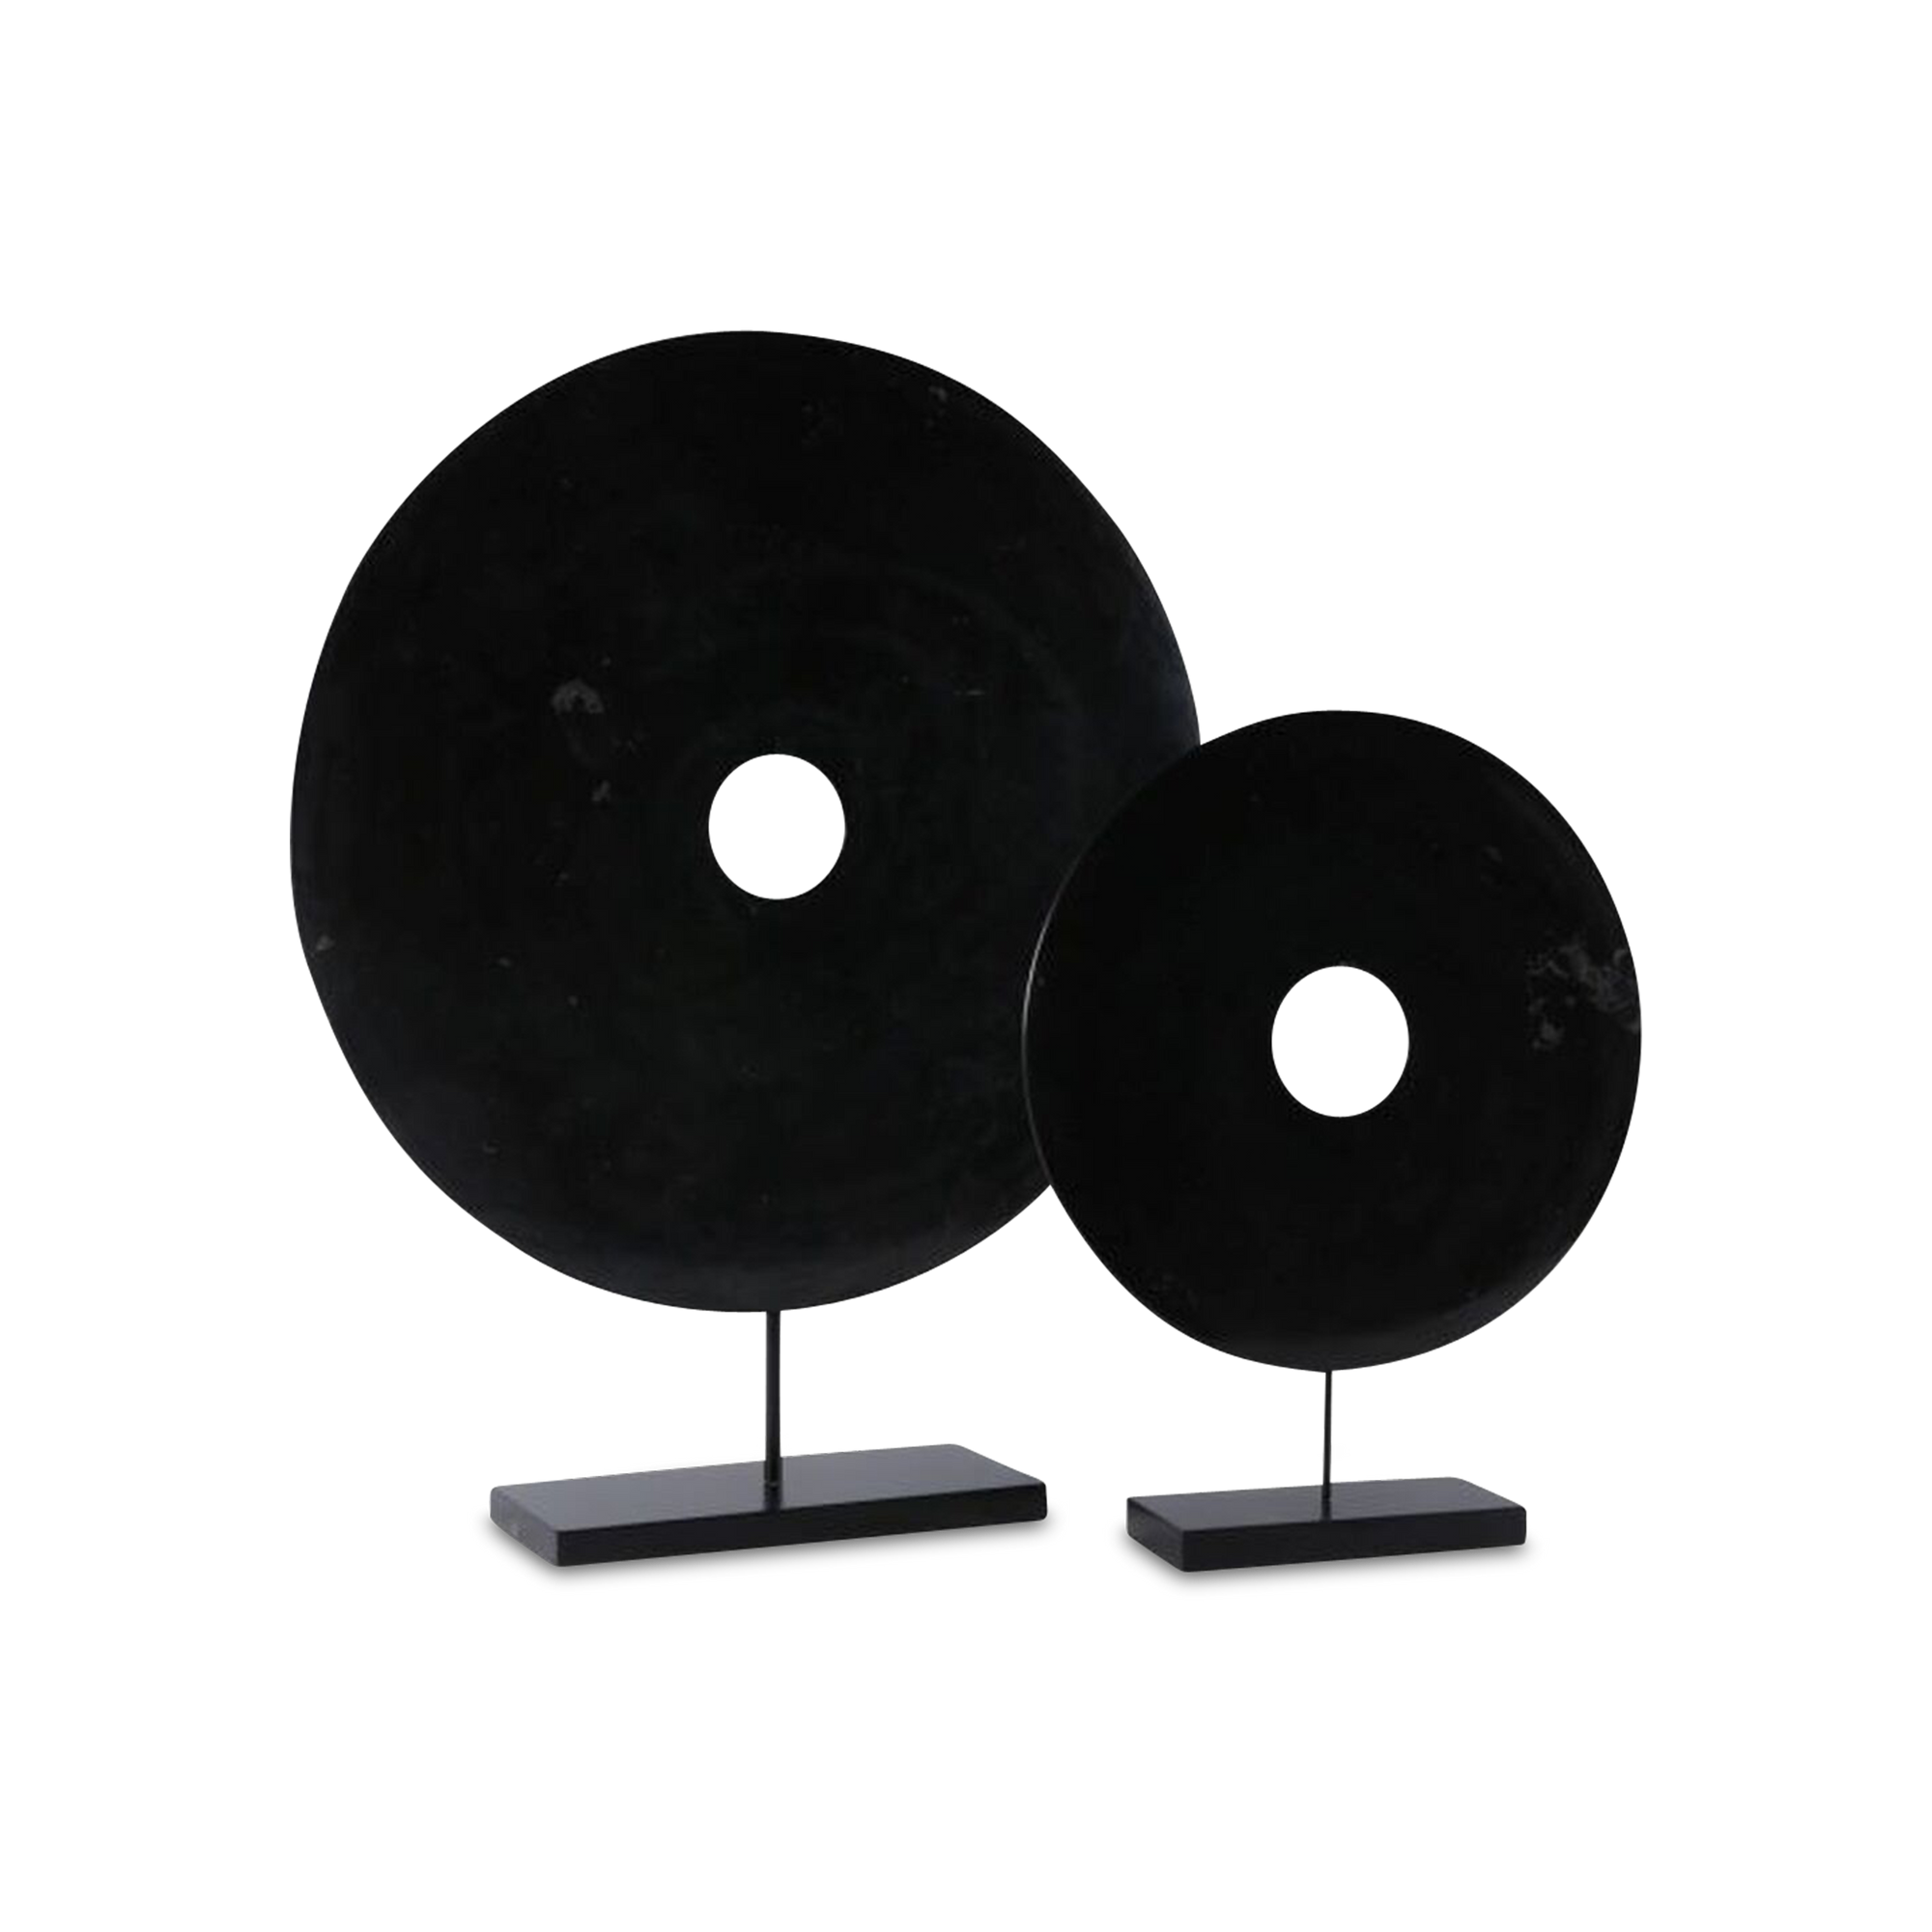 Characterized by its perfectly circular shape and deep black colour, the Marble Disk Statue features a large midnight black jade ring with a low base in Black.